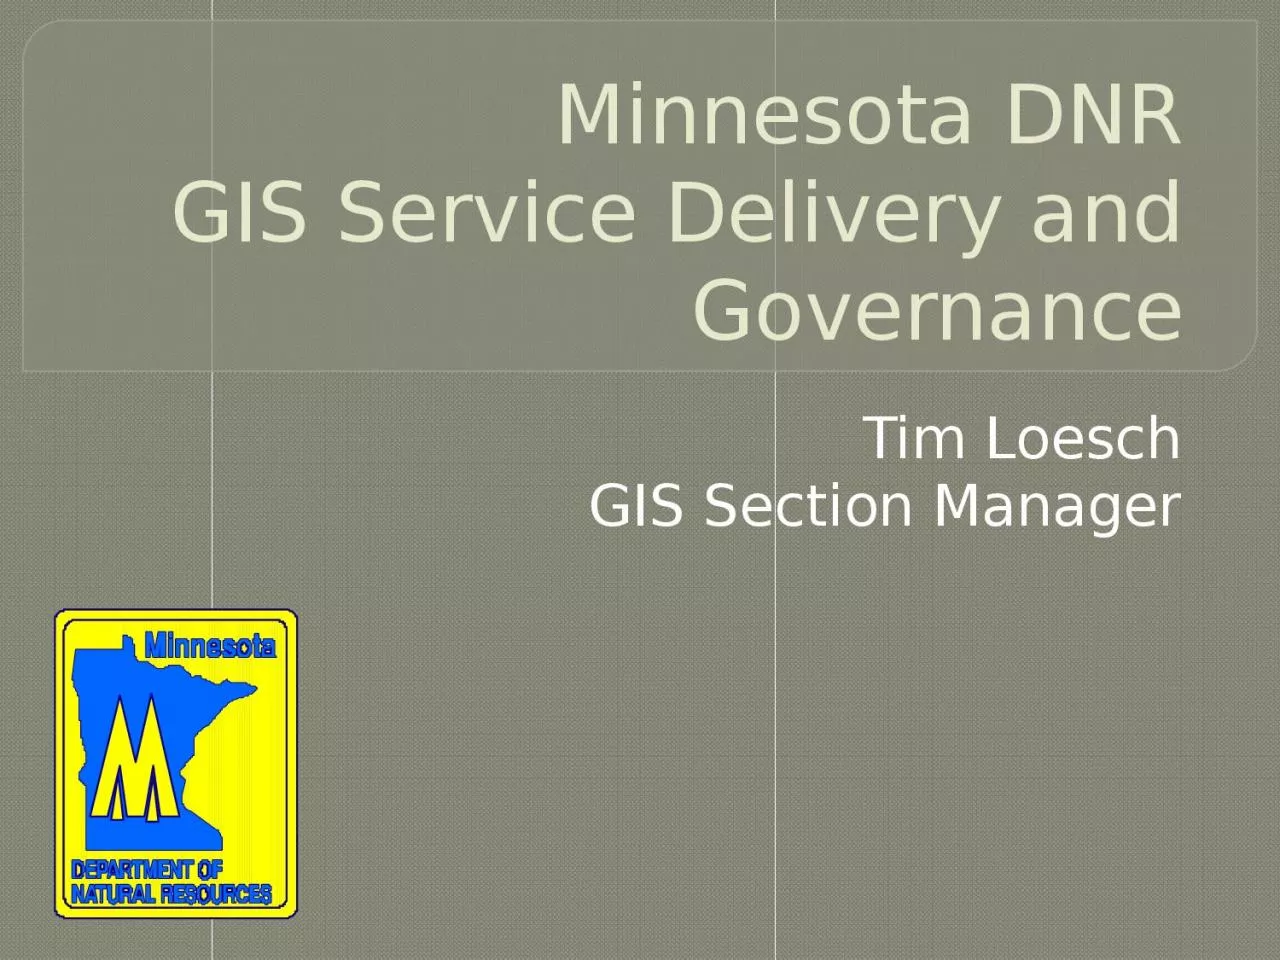 Minnesota DNR GIS Service Delivery and Governance